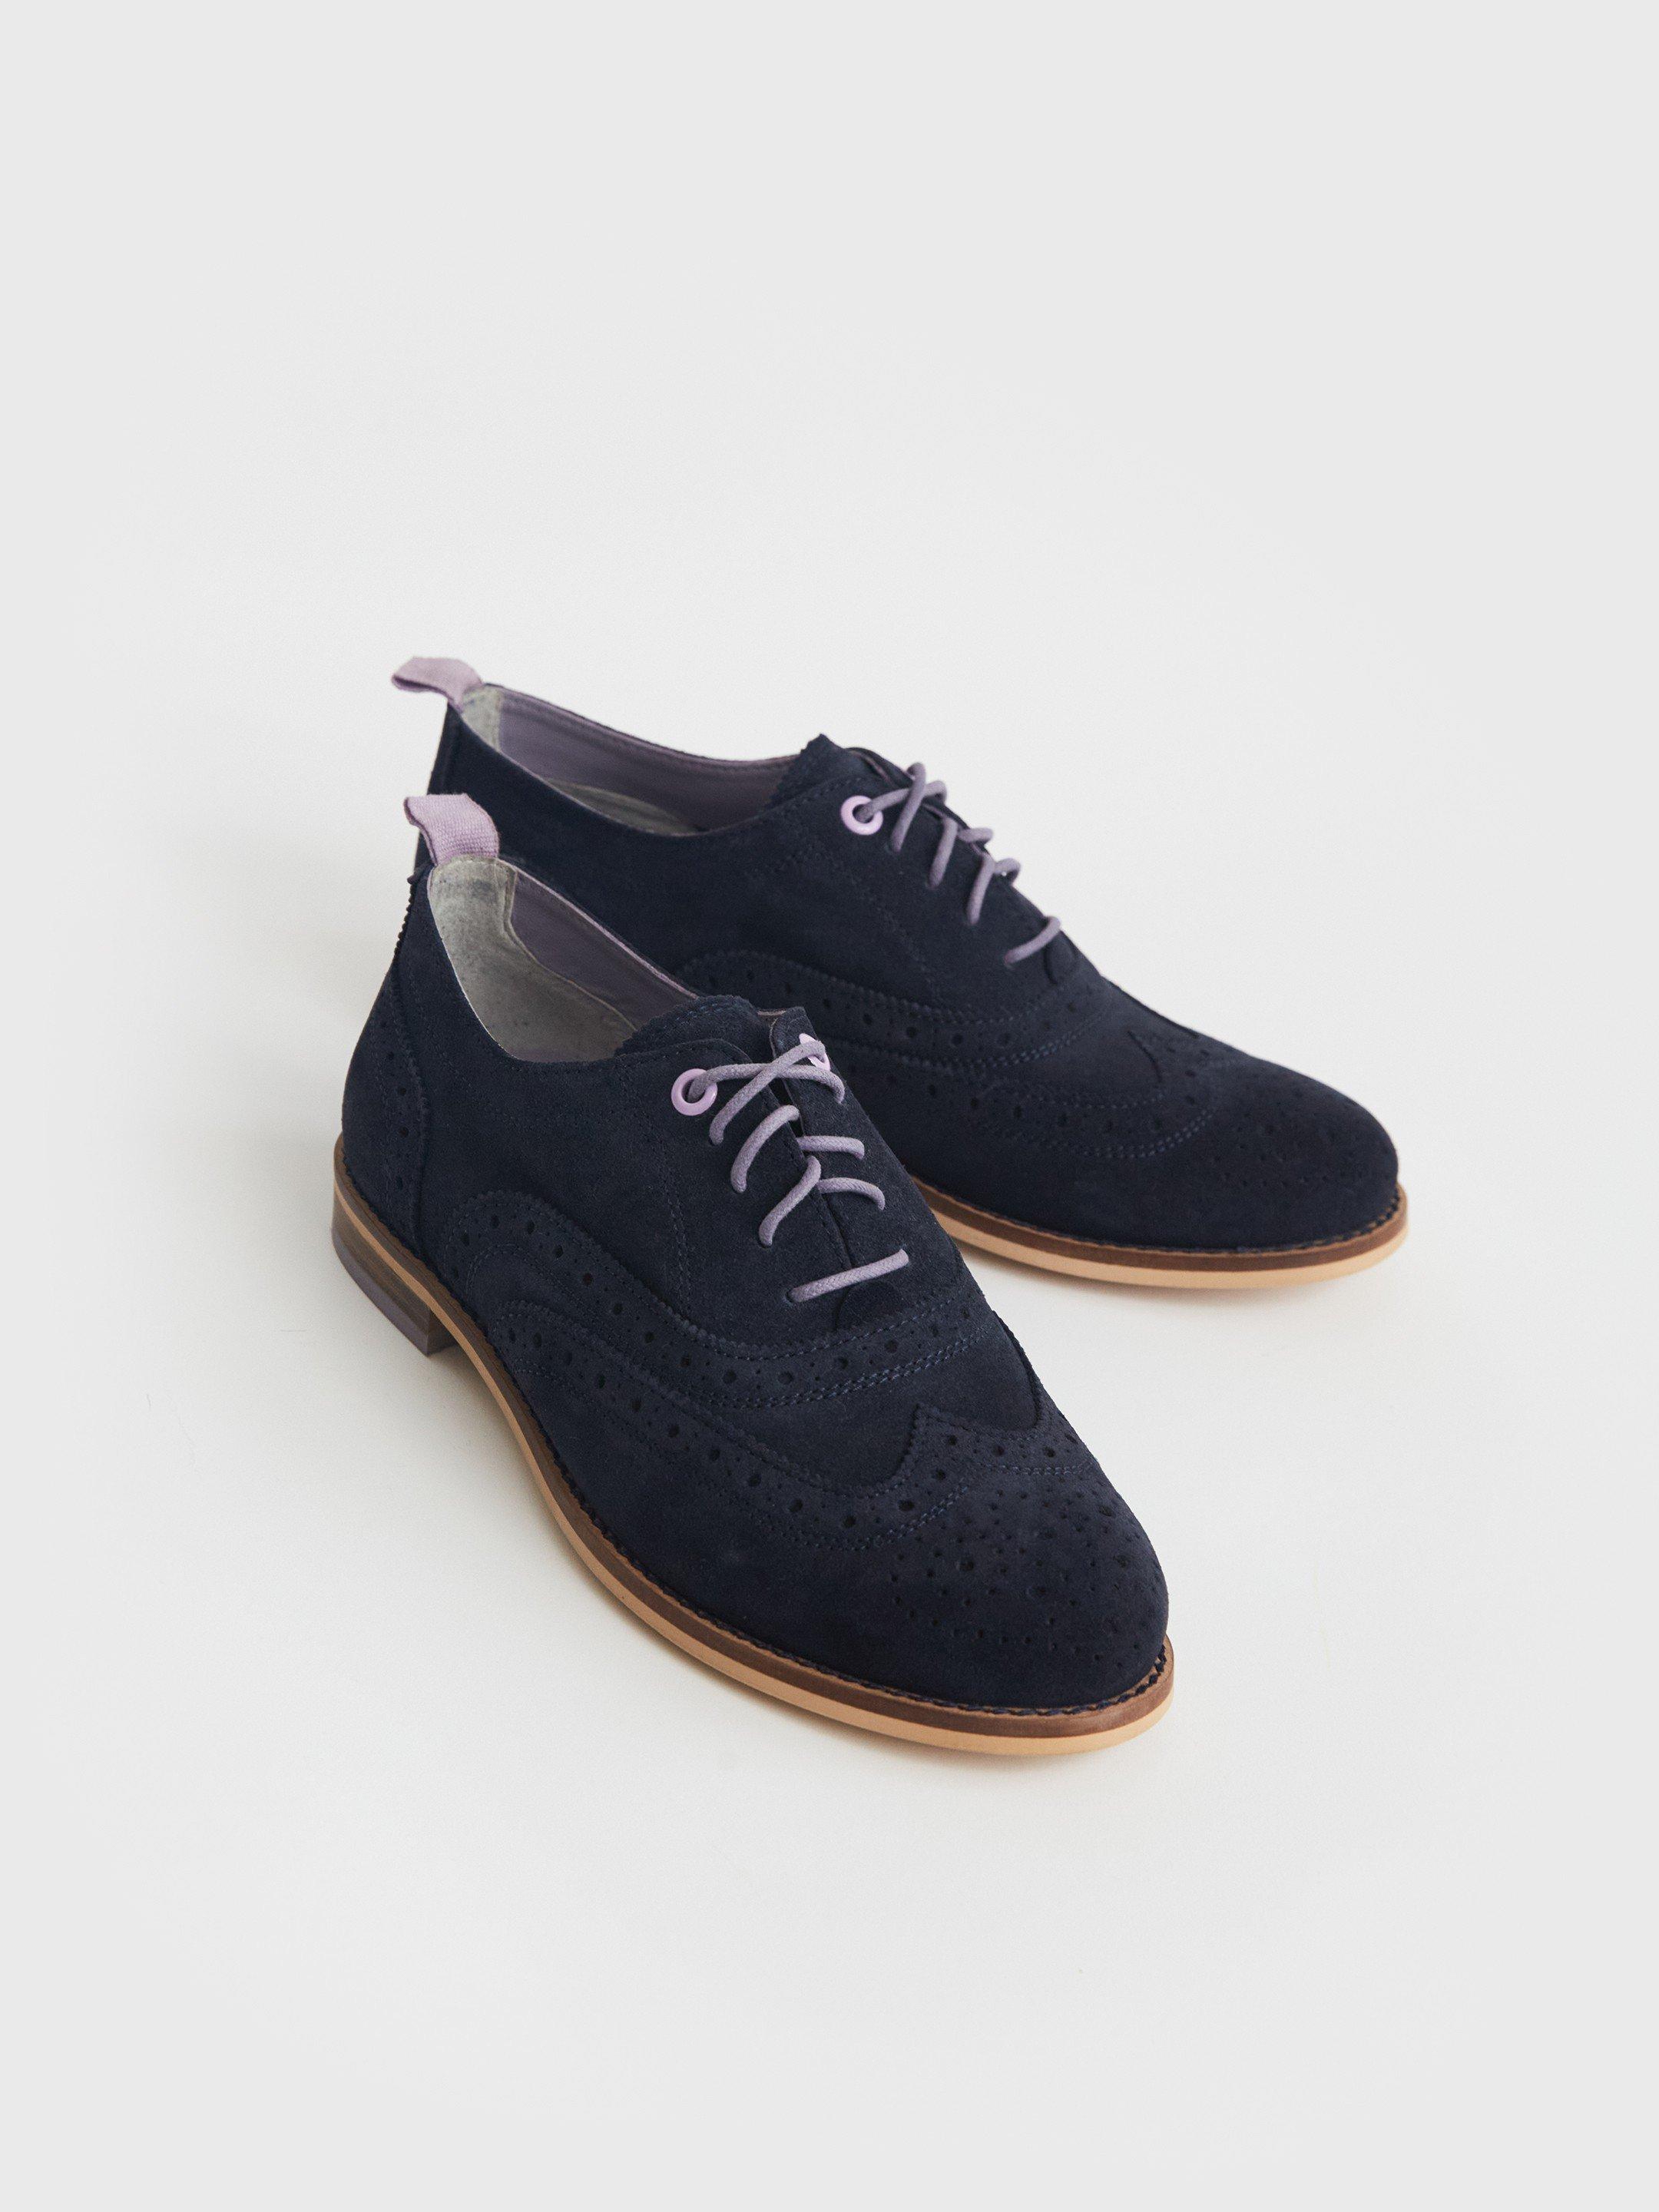 Thistle Lace Up Brogue in DARK NAVY - FLAT FRONT